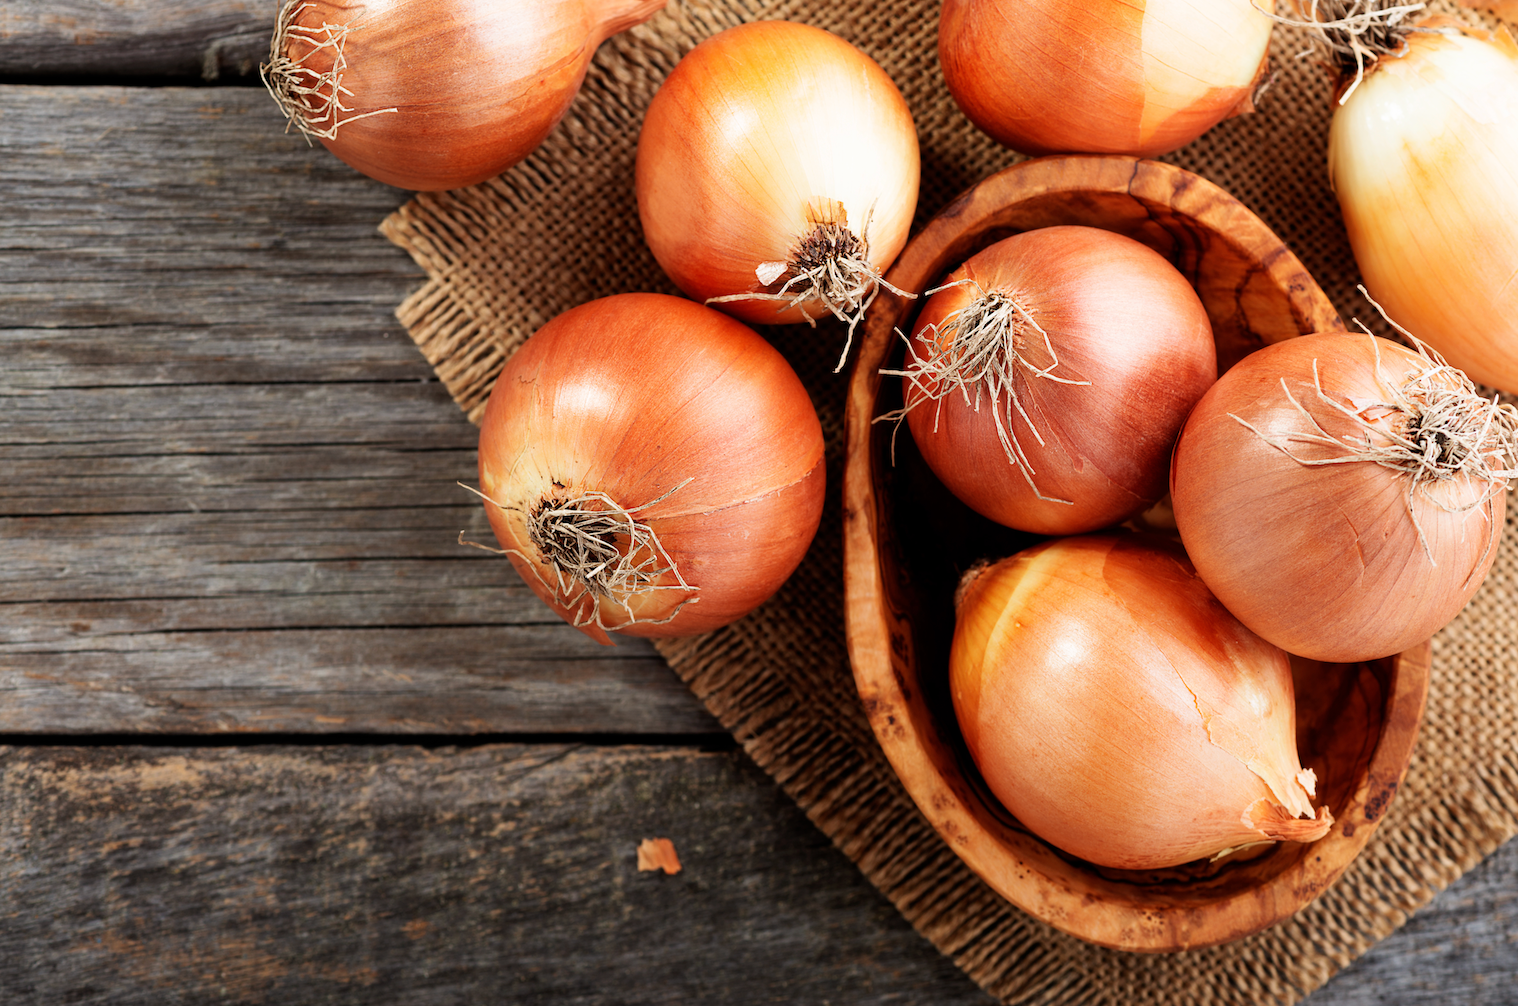 Scar Healing Ingredients: Onion Extract For Scars? || onion extract for scars, best ingredients for scars, onion extract benefits